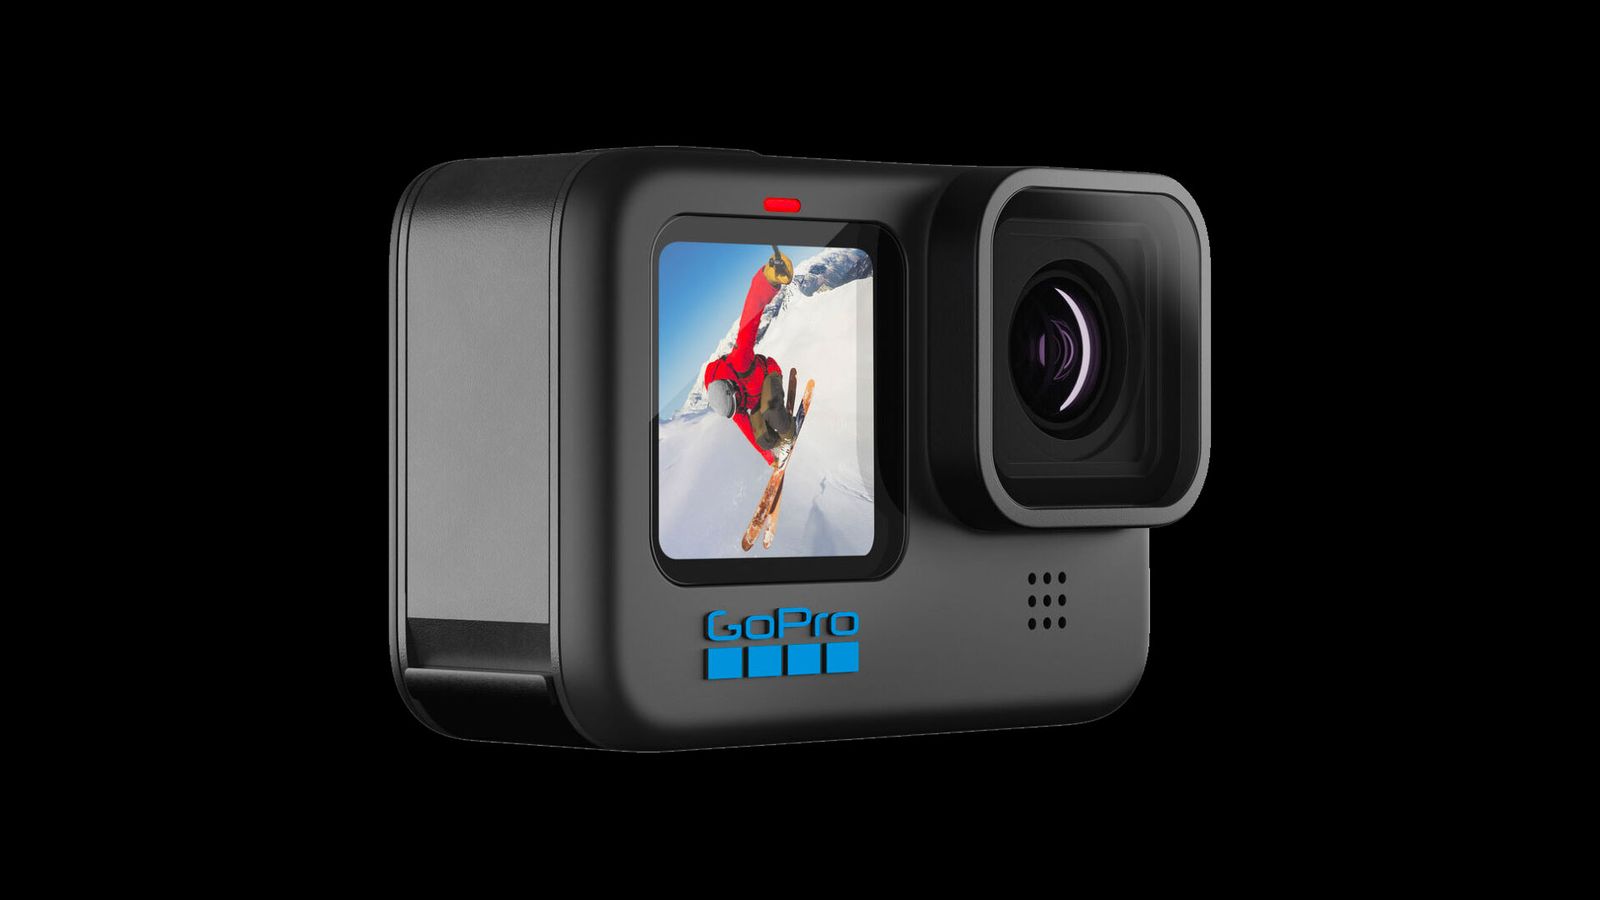 Best GoPro HERO10 product image of a black camera with a blue GoPro logo and front-facing screen.